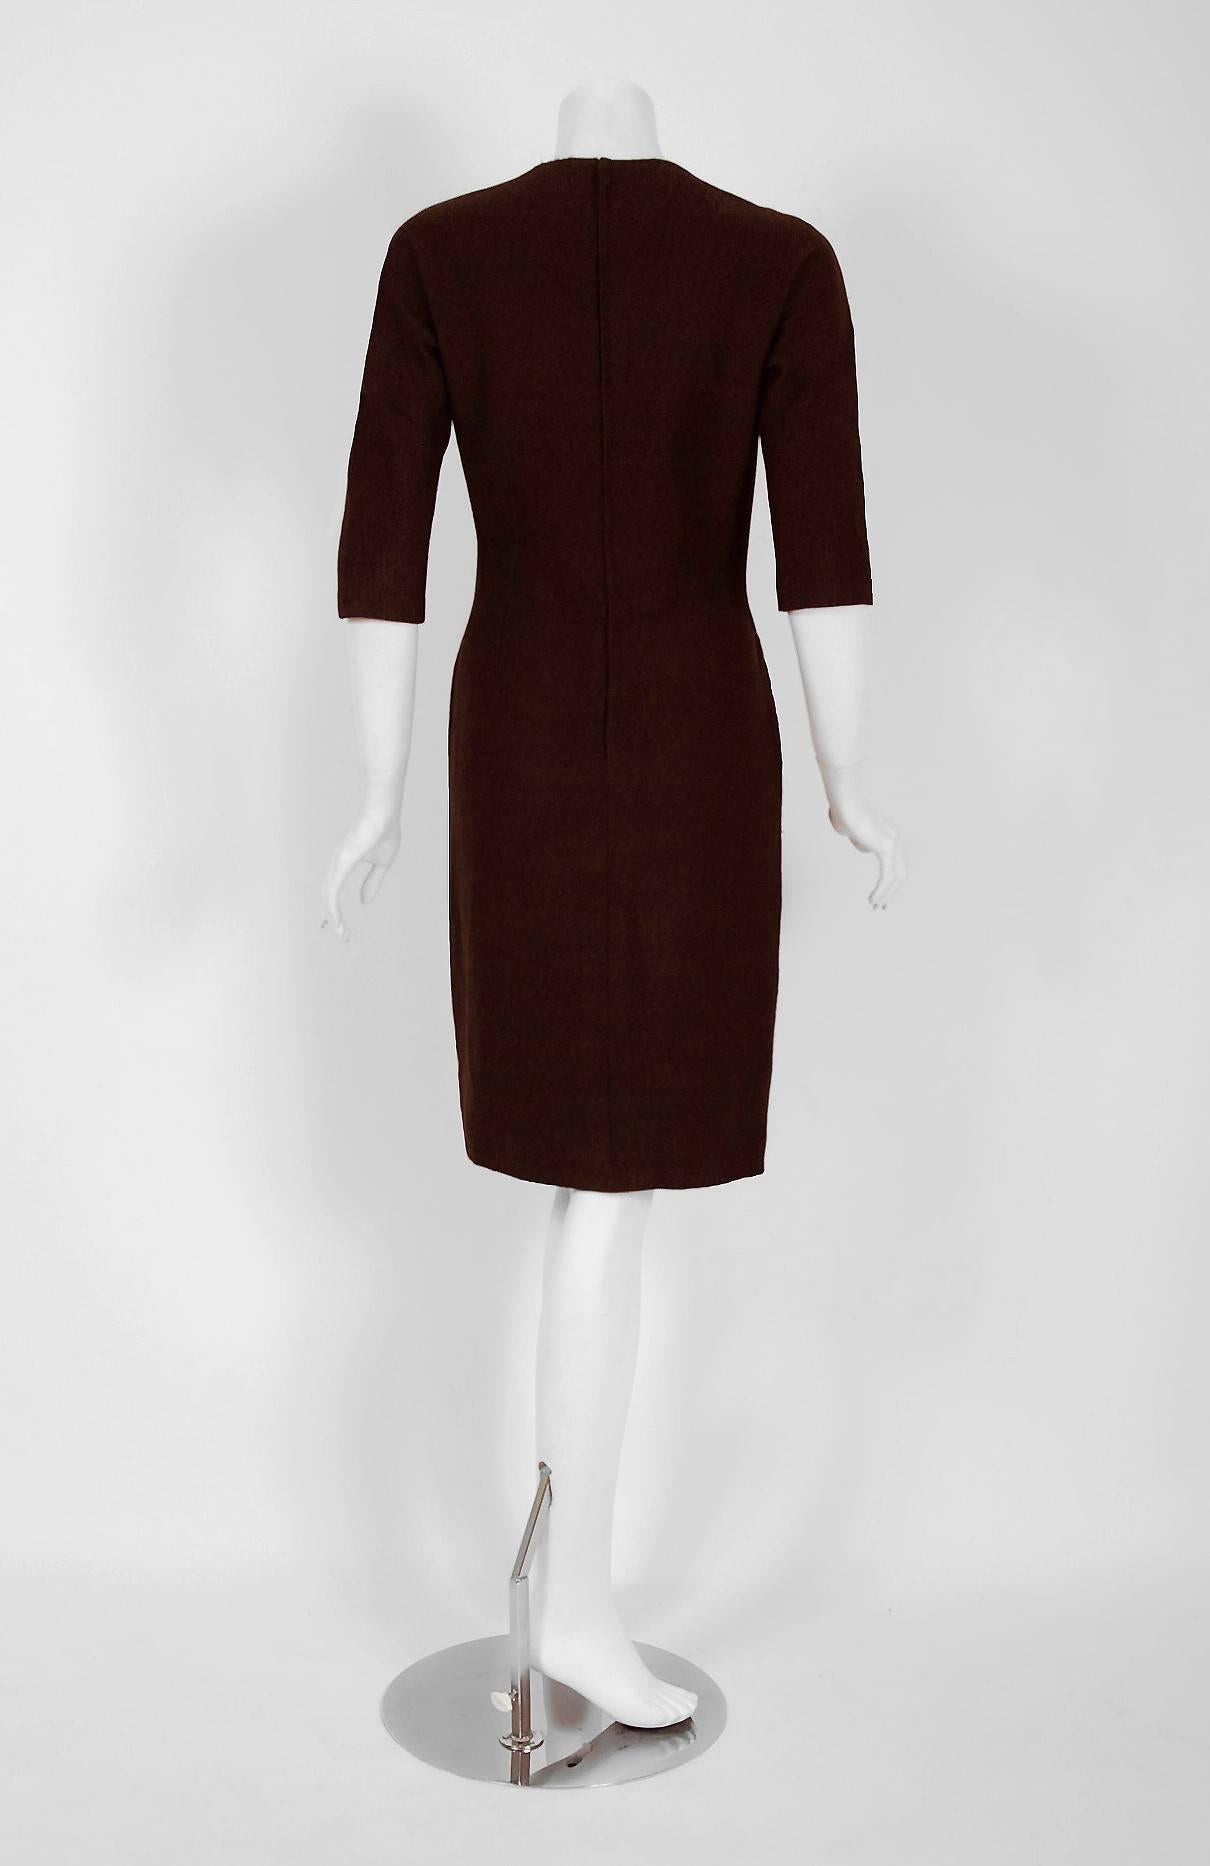 Black Vintage 1955 Sorelle Fontana Couture Brown Wool Sculpted Buckle Wiggle Dress